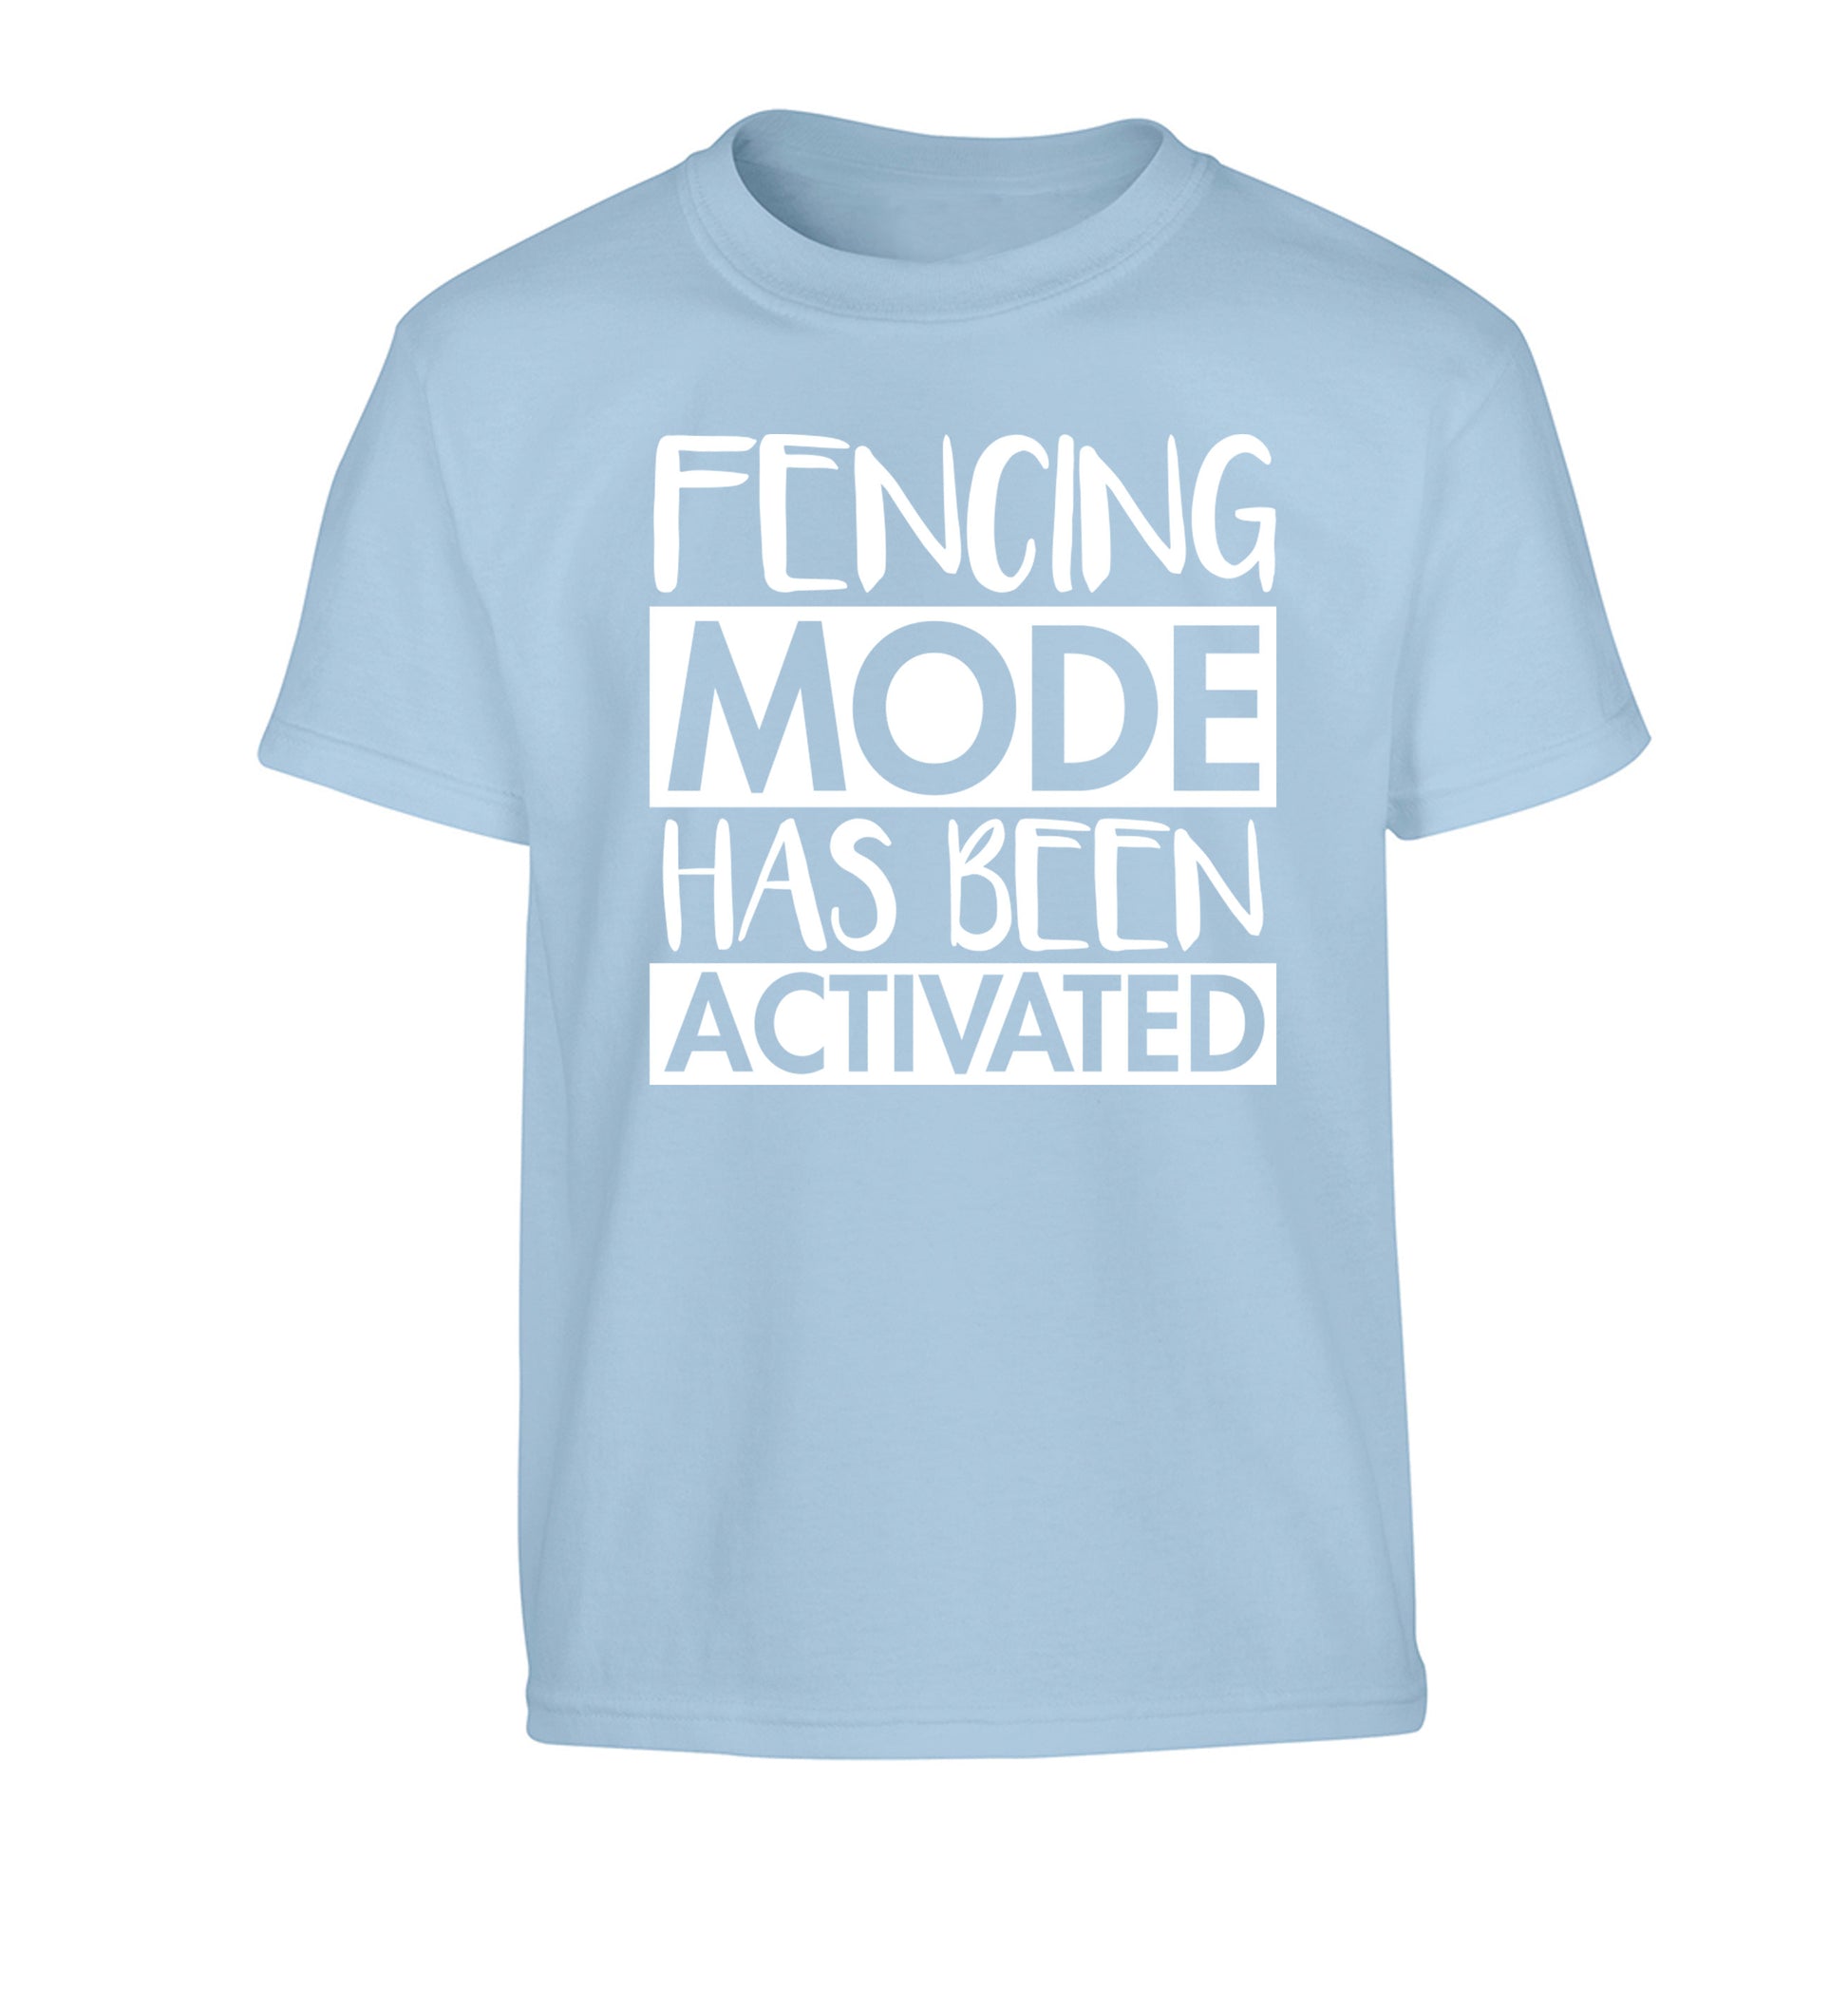 Fencing mode activated Children's light blue Tshirt 12-14 Years